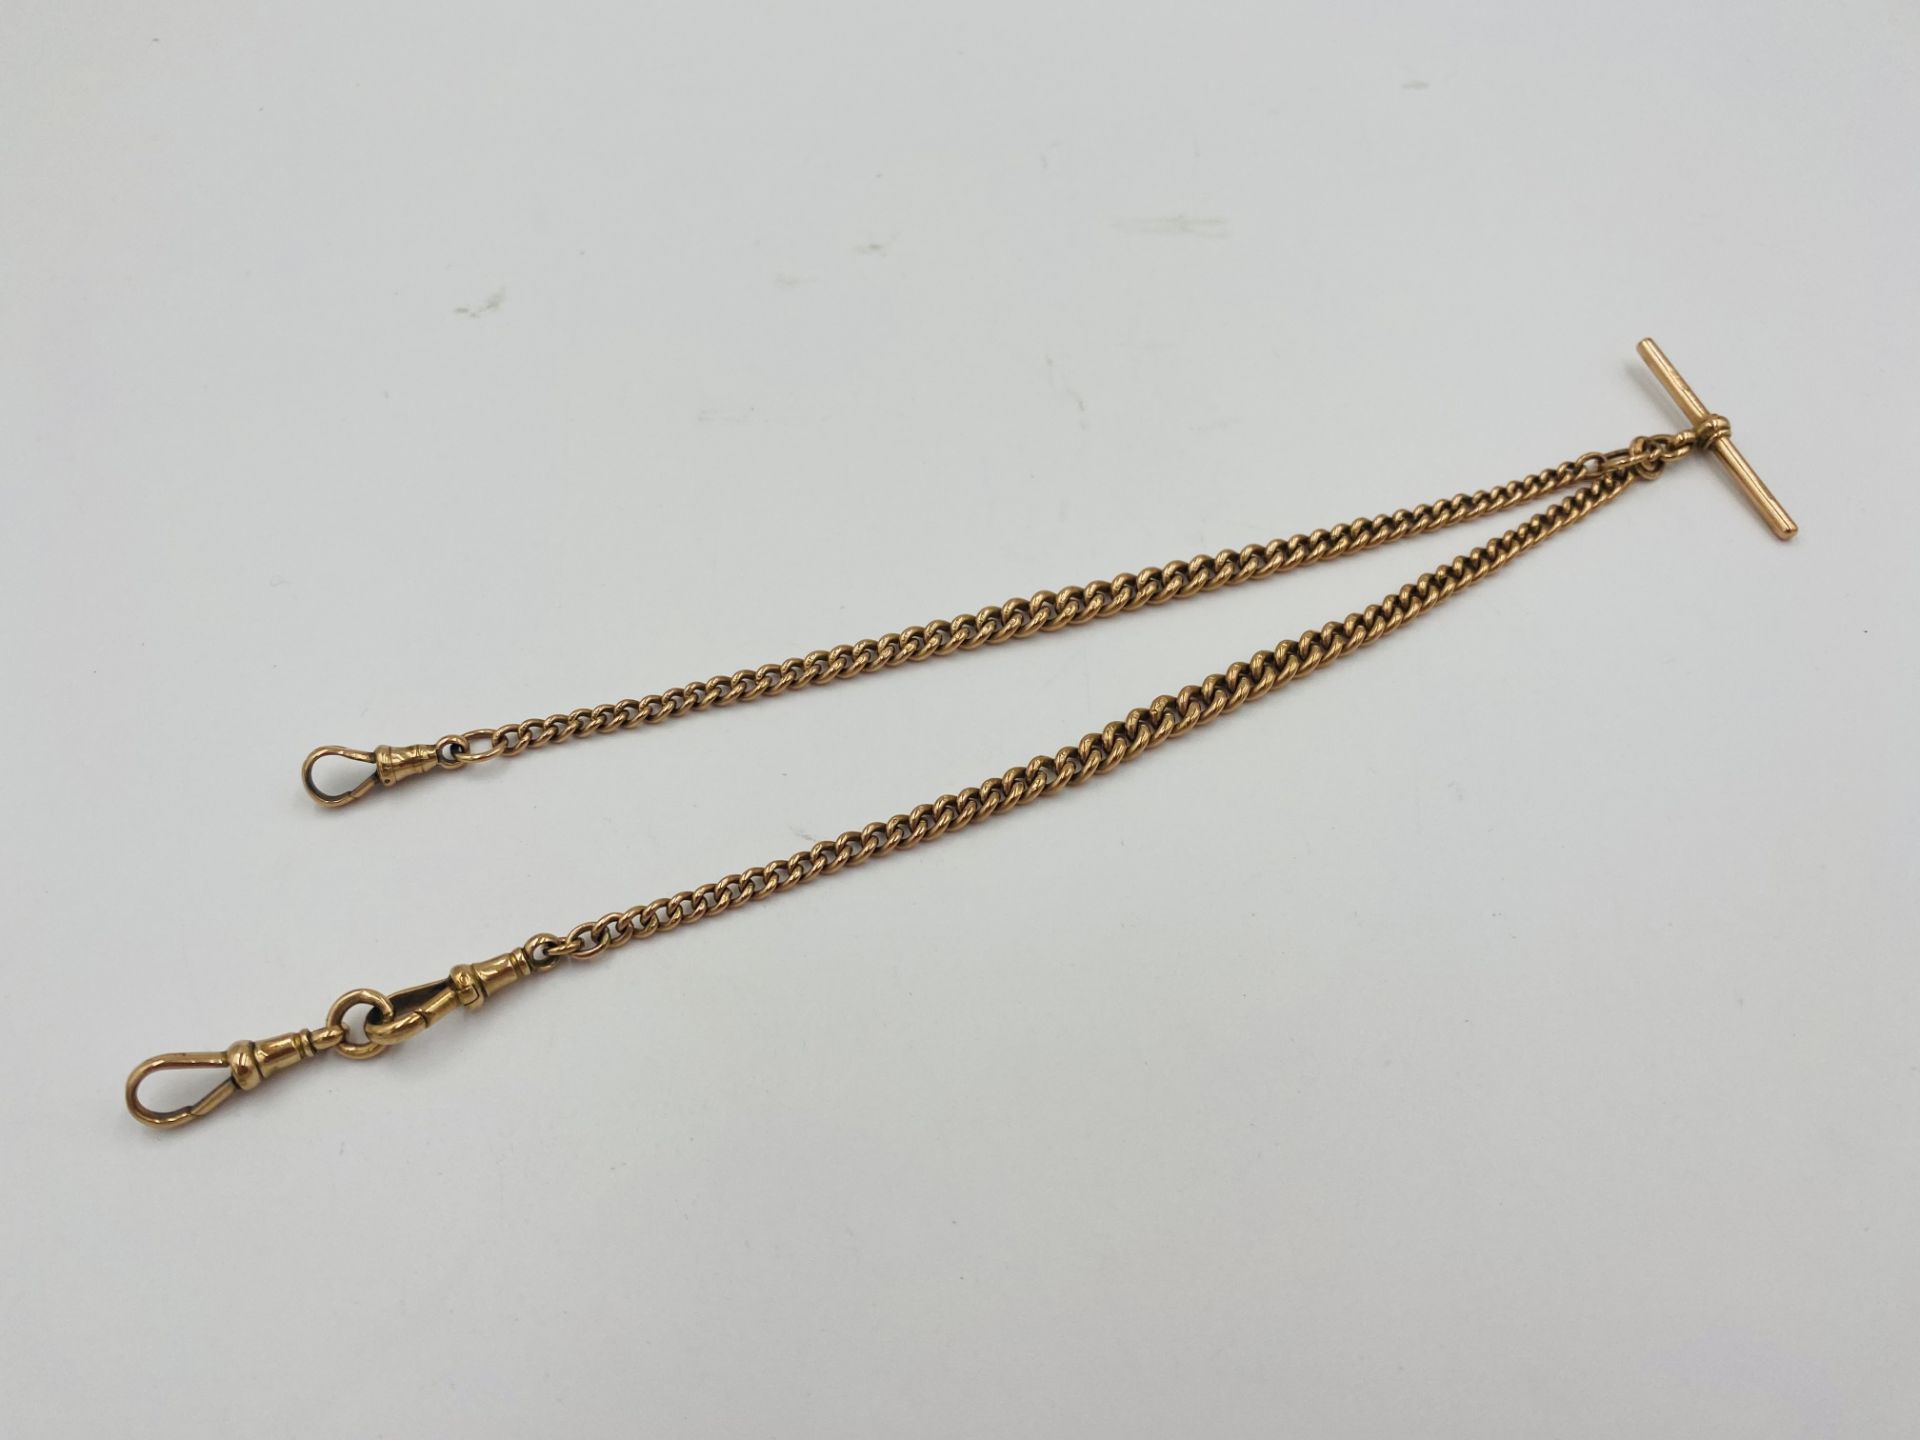 9ct gold fob chain - Image 2 of 5